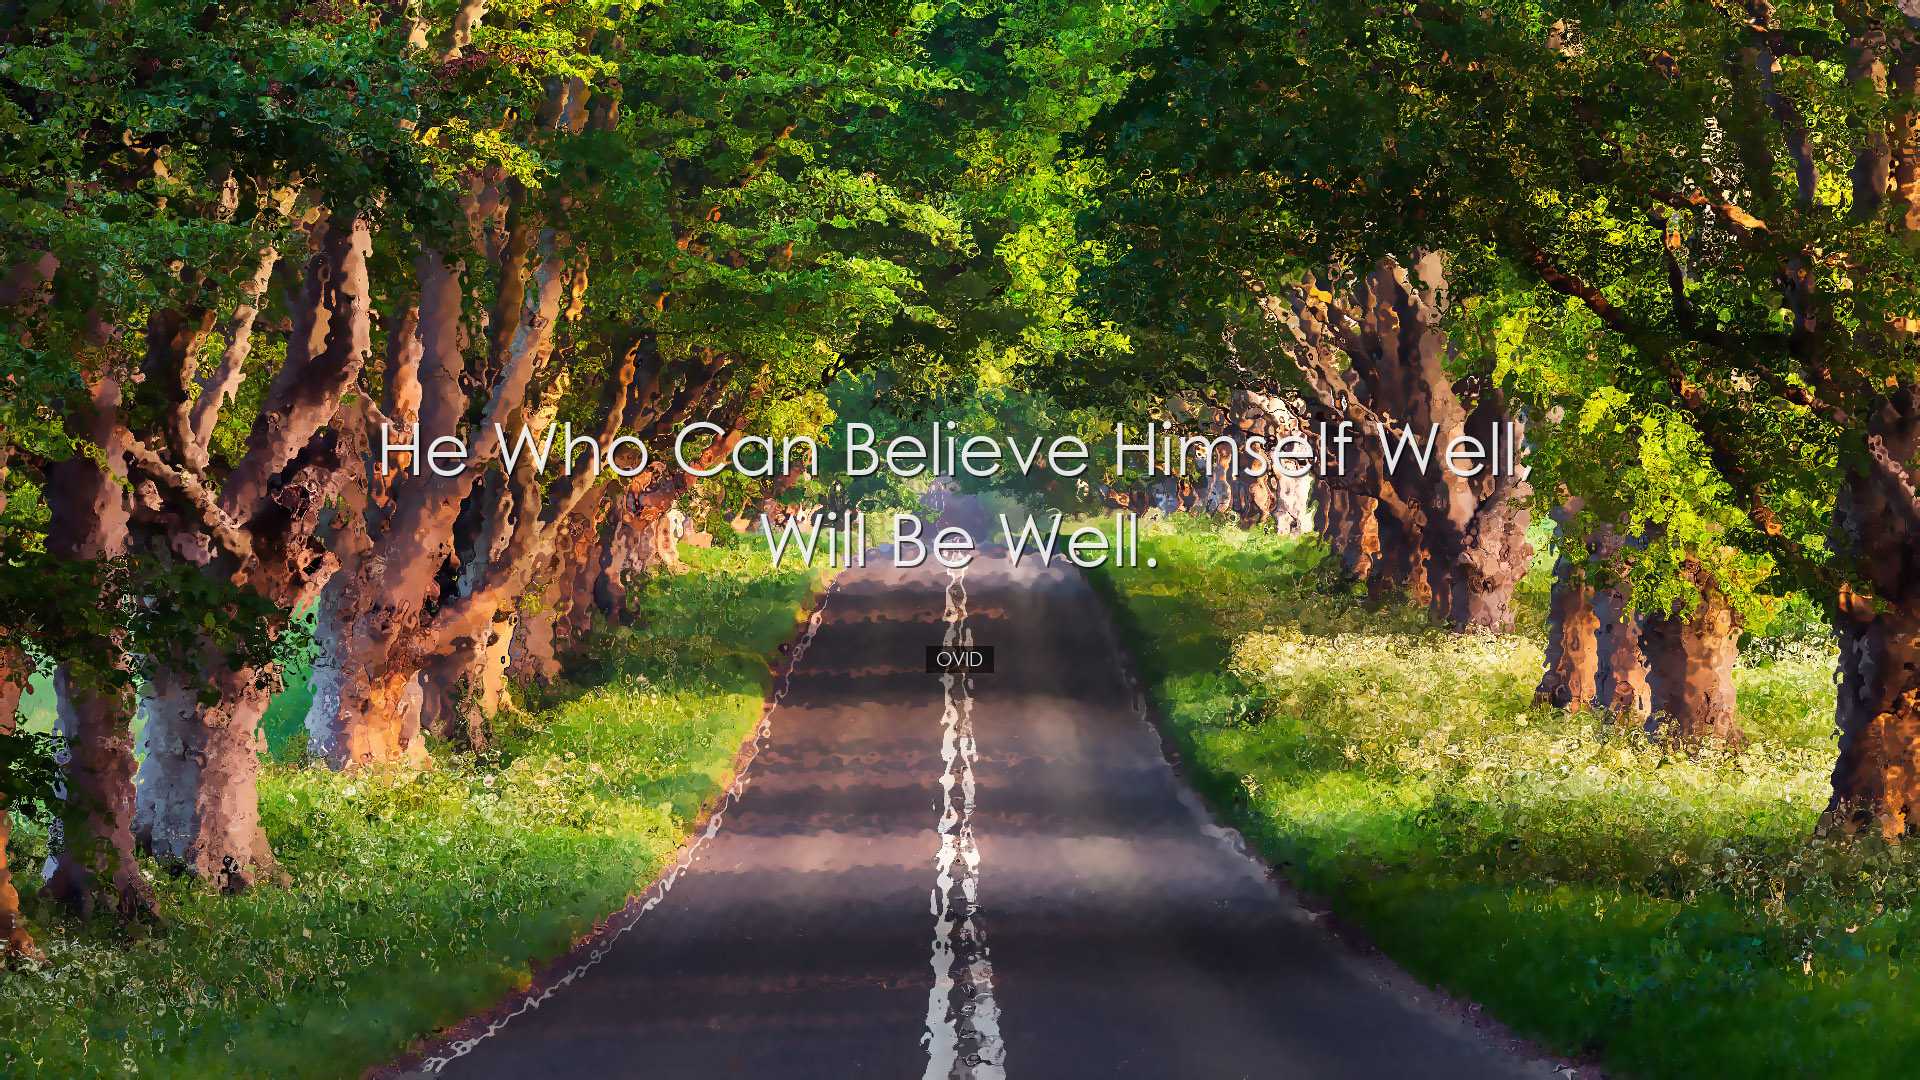 He who can believe himself well, will be well. - Ovid